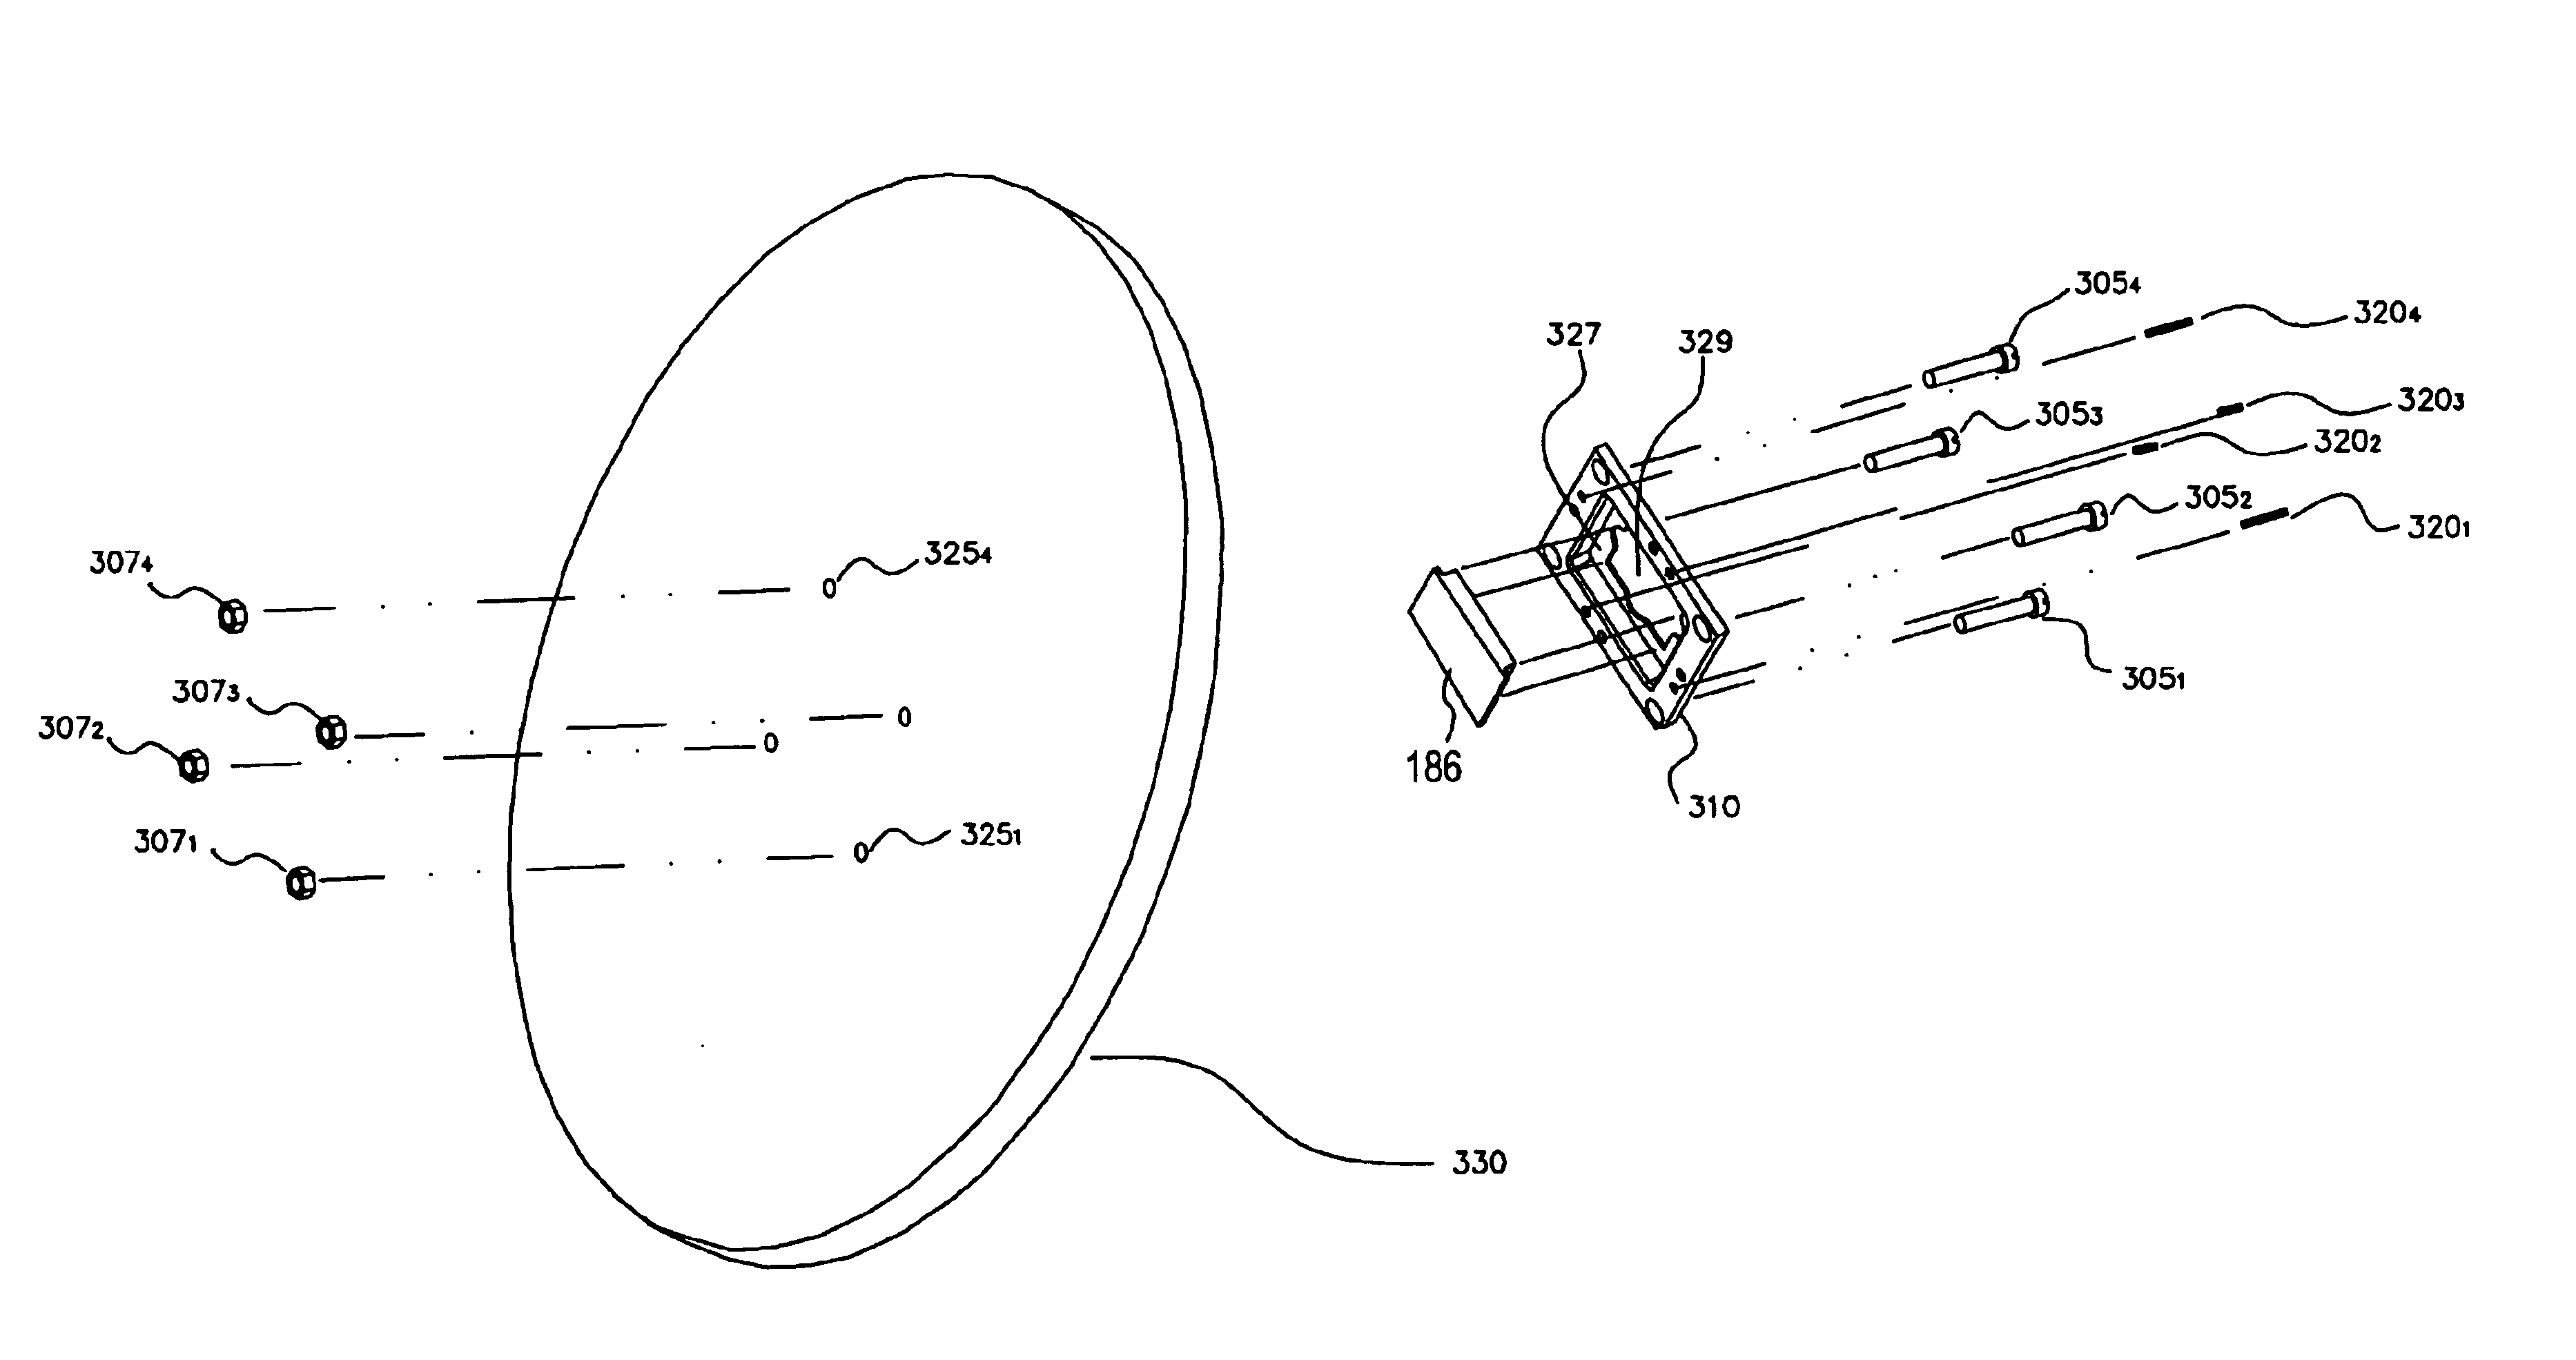 Probe structures using clamped substrates with compliant interconnectors